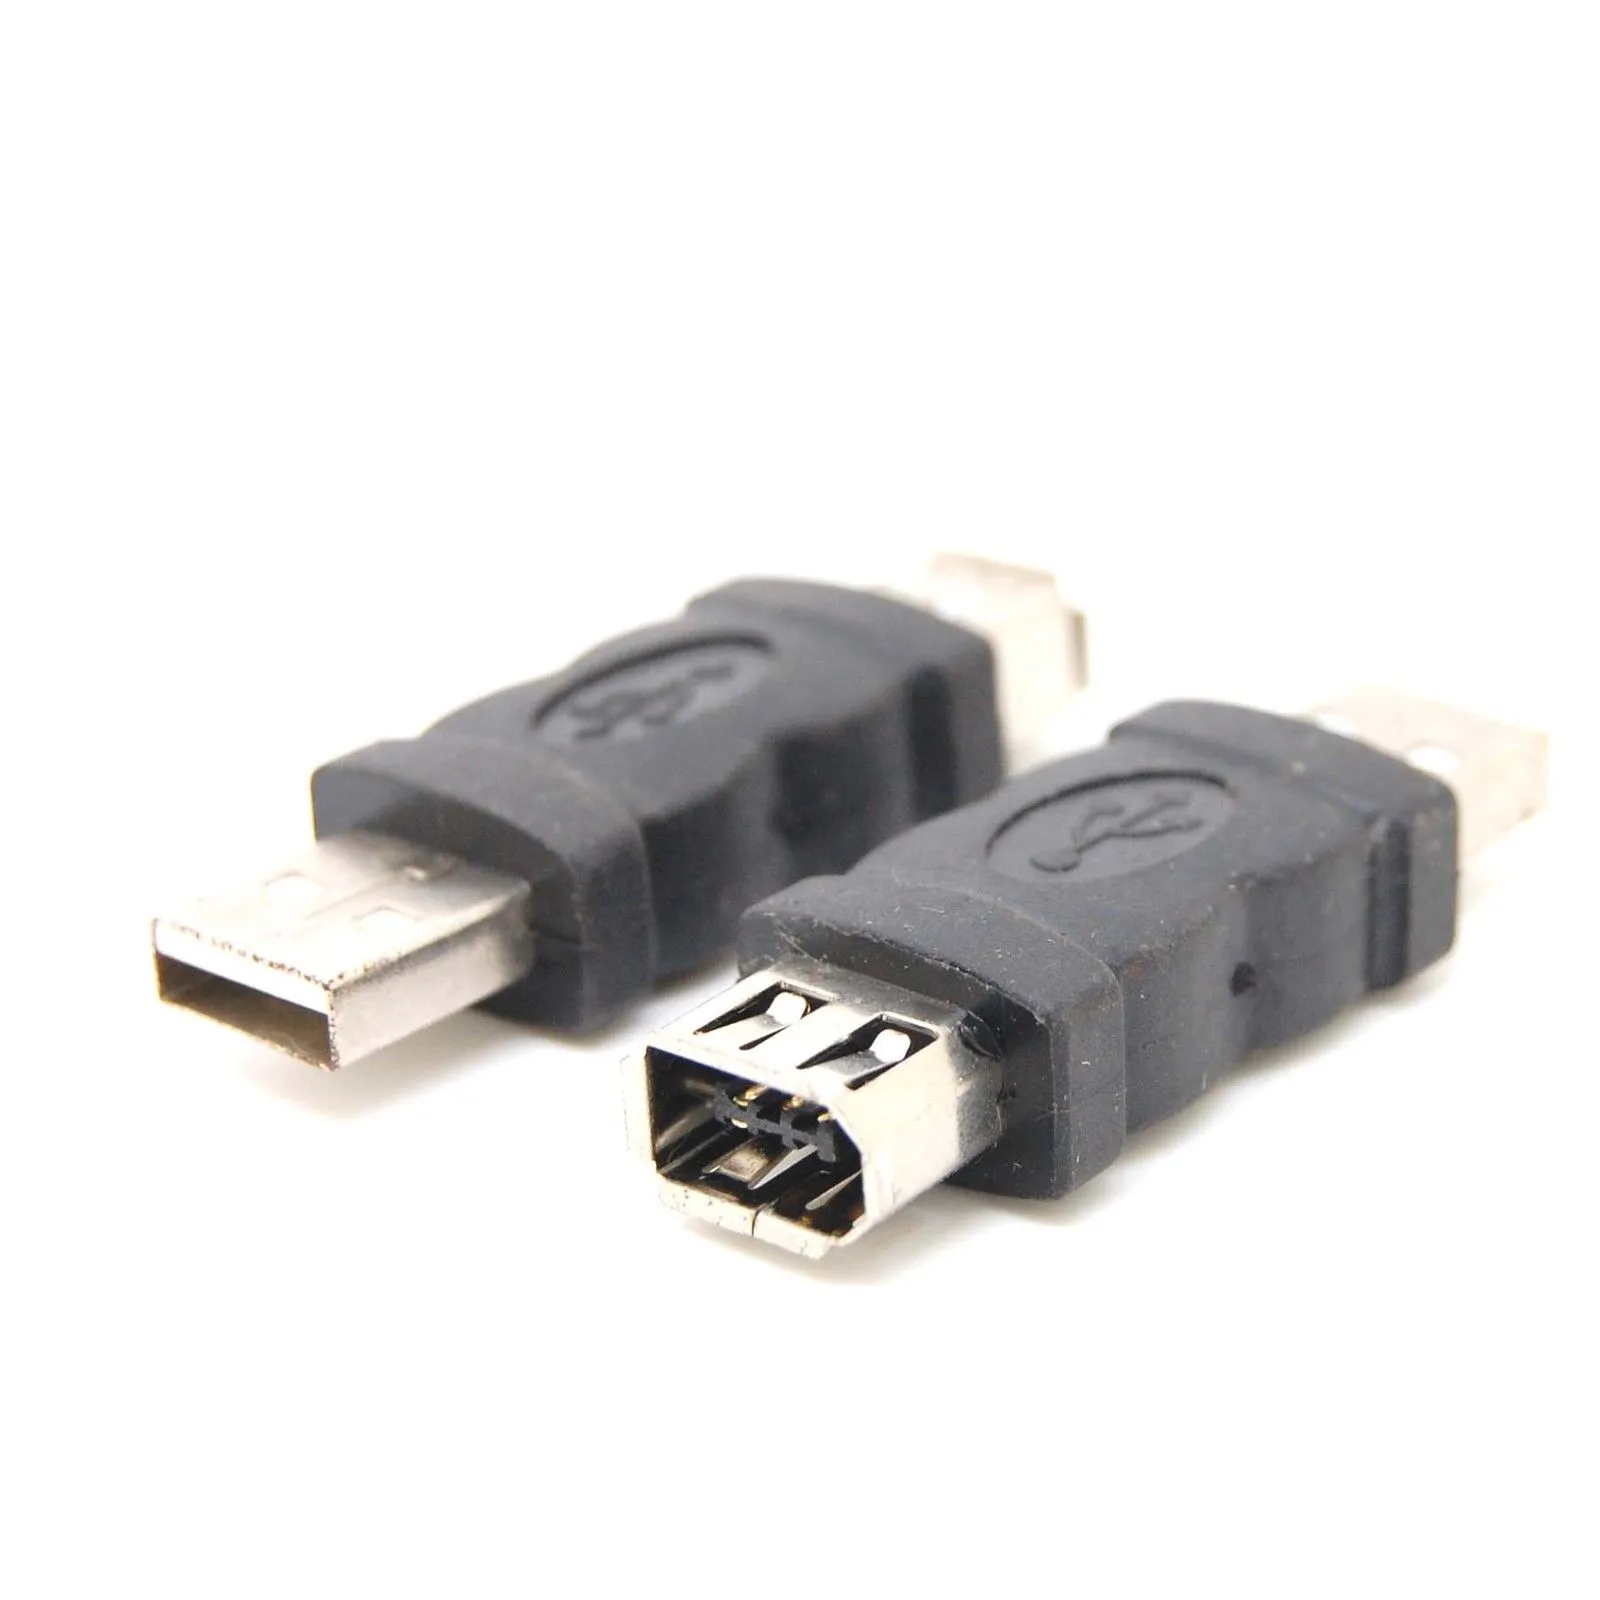 Firewire IEEE 1394 6-Pin Female F to USB M Male Adapter Converter Joiner Plug PC 